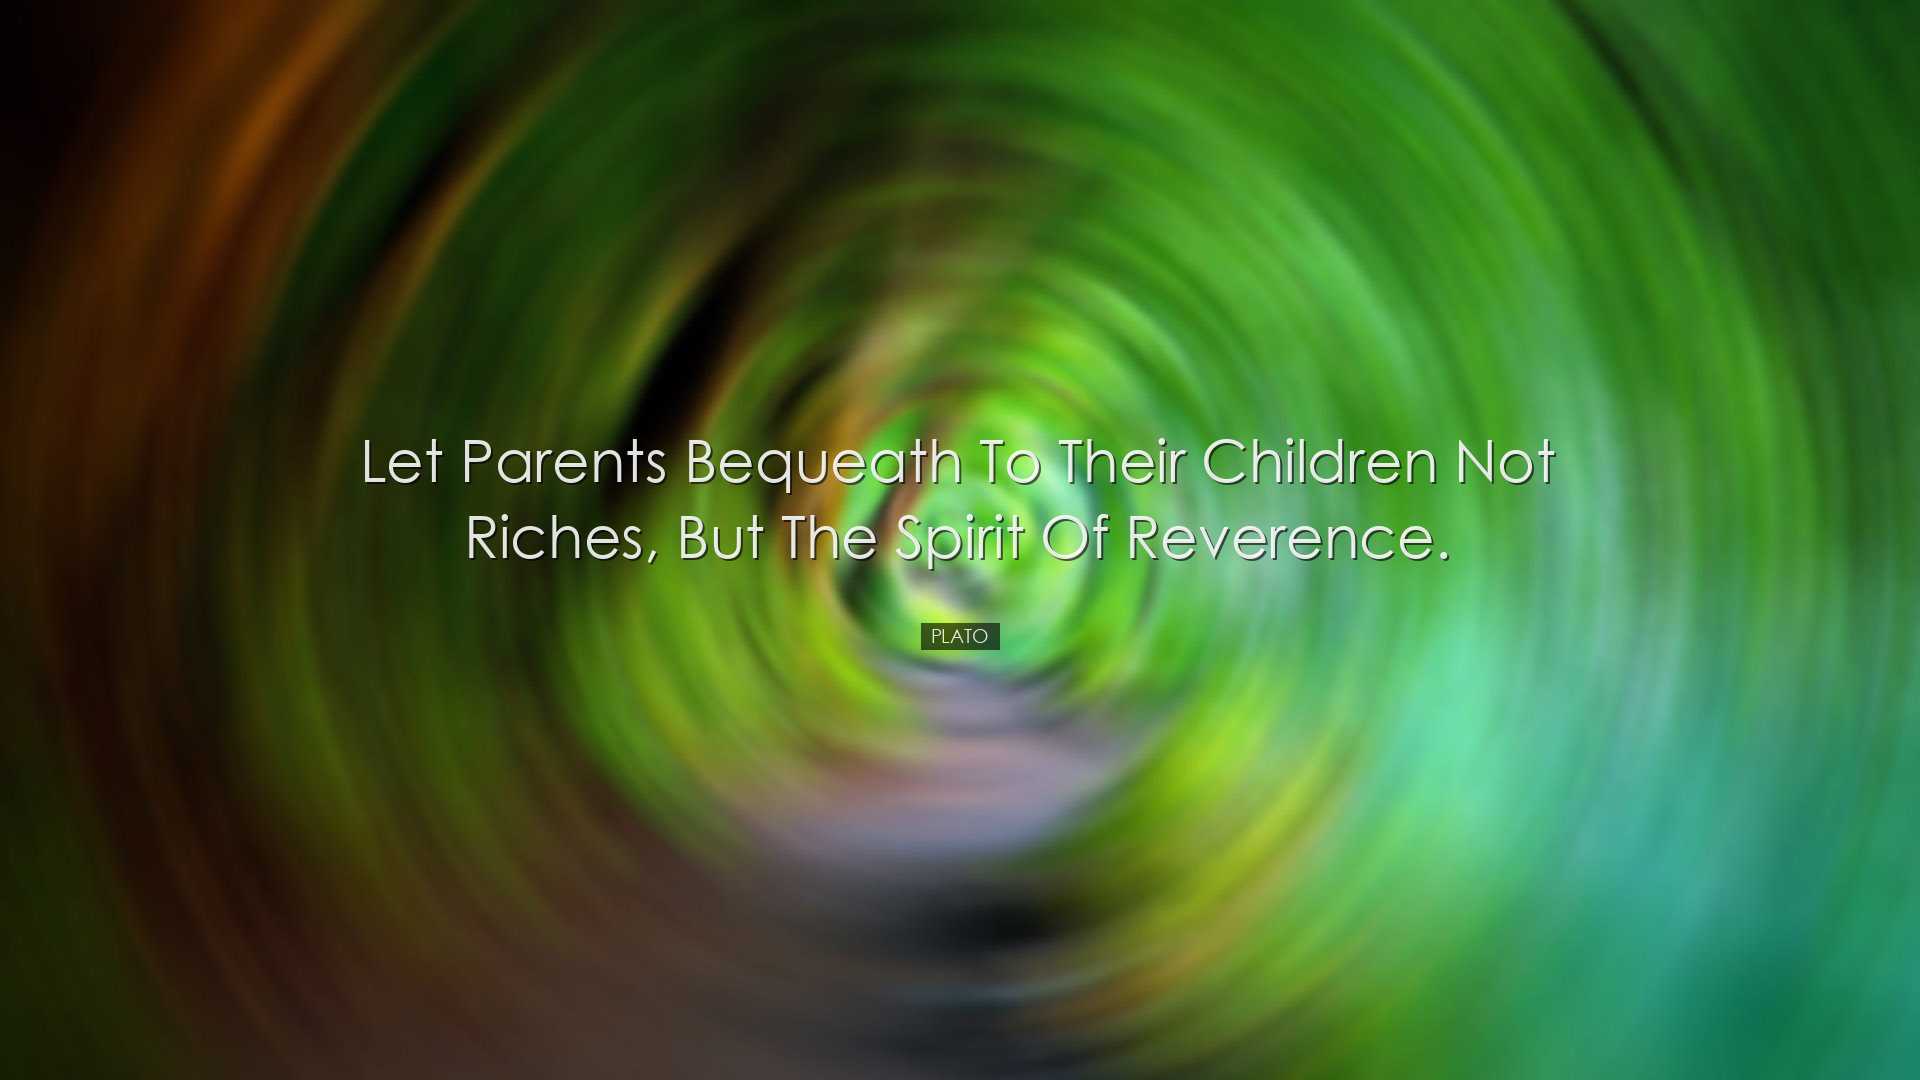 Let parents bequeath to their children not riches, but the spirit